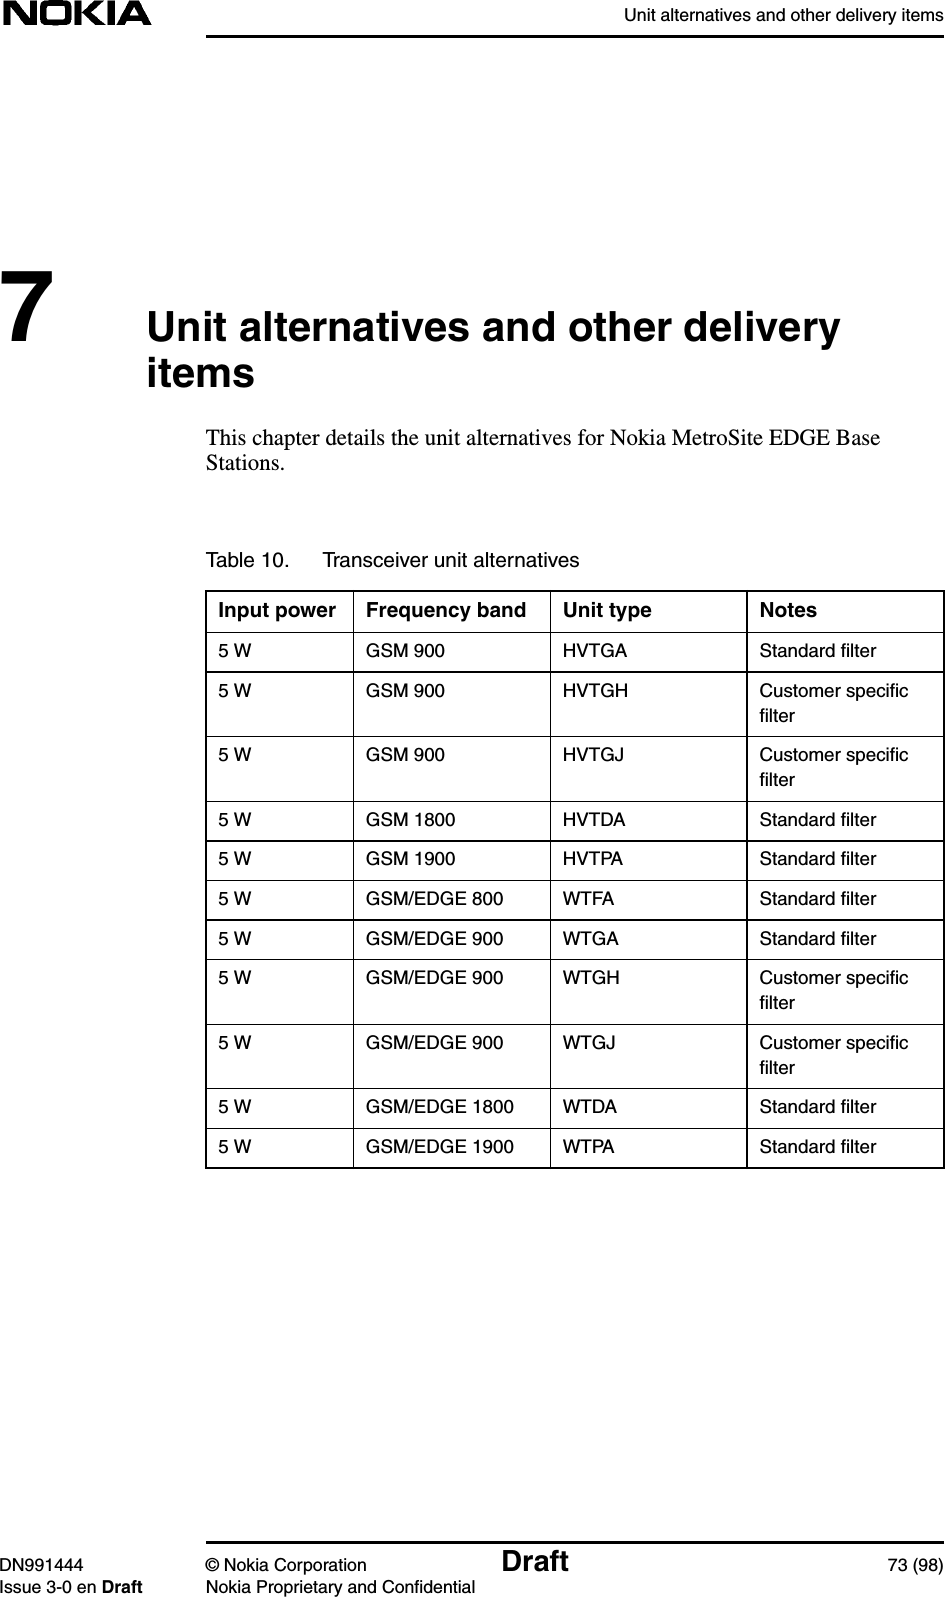 Unit alternatives and other delivery itemsDN991444 © Nokia Corporation Draft 73 (98)Issue 3-0 en Draft Nokia Proprietary and Confidential7Unit alternatives and other deliveryitemsThis chapter details the unit alternatives for Nokia MetroSite EDGE BaseStations.Table 10. Transceiver unit alternativesInput power Frequency band Unit type Notes5 W GSM 900 HVTGA Standard ﬁlter5 W GSM 900 HVTGH Customer speciﬁcﬁlter5 W GSM 900 HVTGJ Customer speciﬁcﬁlter5 W GSM 1800 HVTDA Standard ﬁlter5 W GSM 1900 HVTPA Standard ﬁlter5 W GSM/EDGE 800 WTFA Standard ﬁlter5 W GSM/EDGE 900 WTGA Standard ﬁlter5 W GSM/EDGE 900 WTGH Customer speciﬁcﬁlter5 W GSM/EDGE 900 WTGJ Customer speciﬁcﬁlter5 W GSM/EDGE 1800 WTDA Standard ﬁlter5 W GSM/EDGE 1900 WTPA Standard ﬁlter